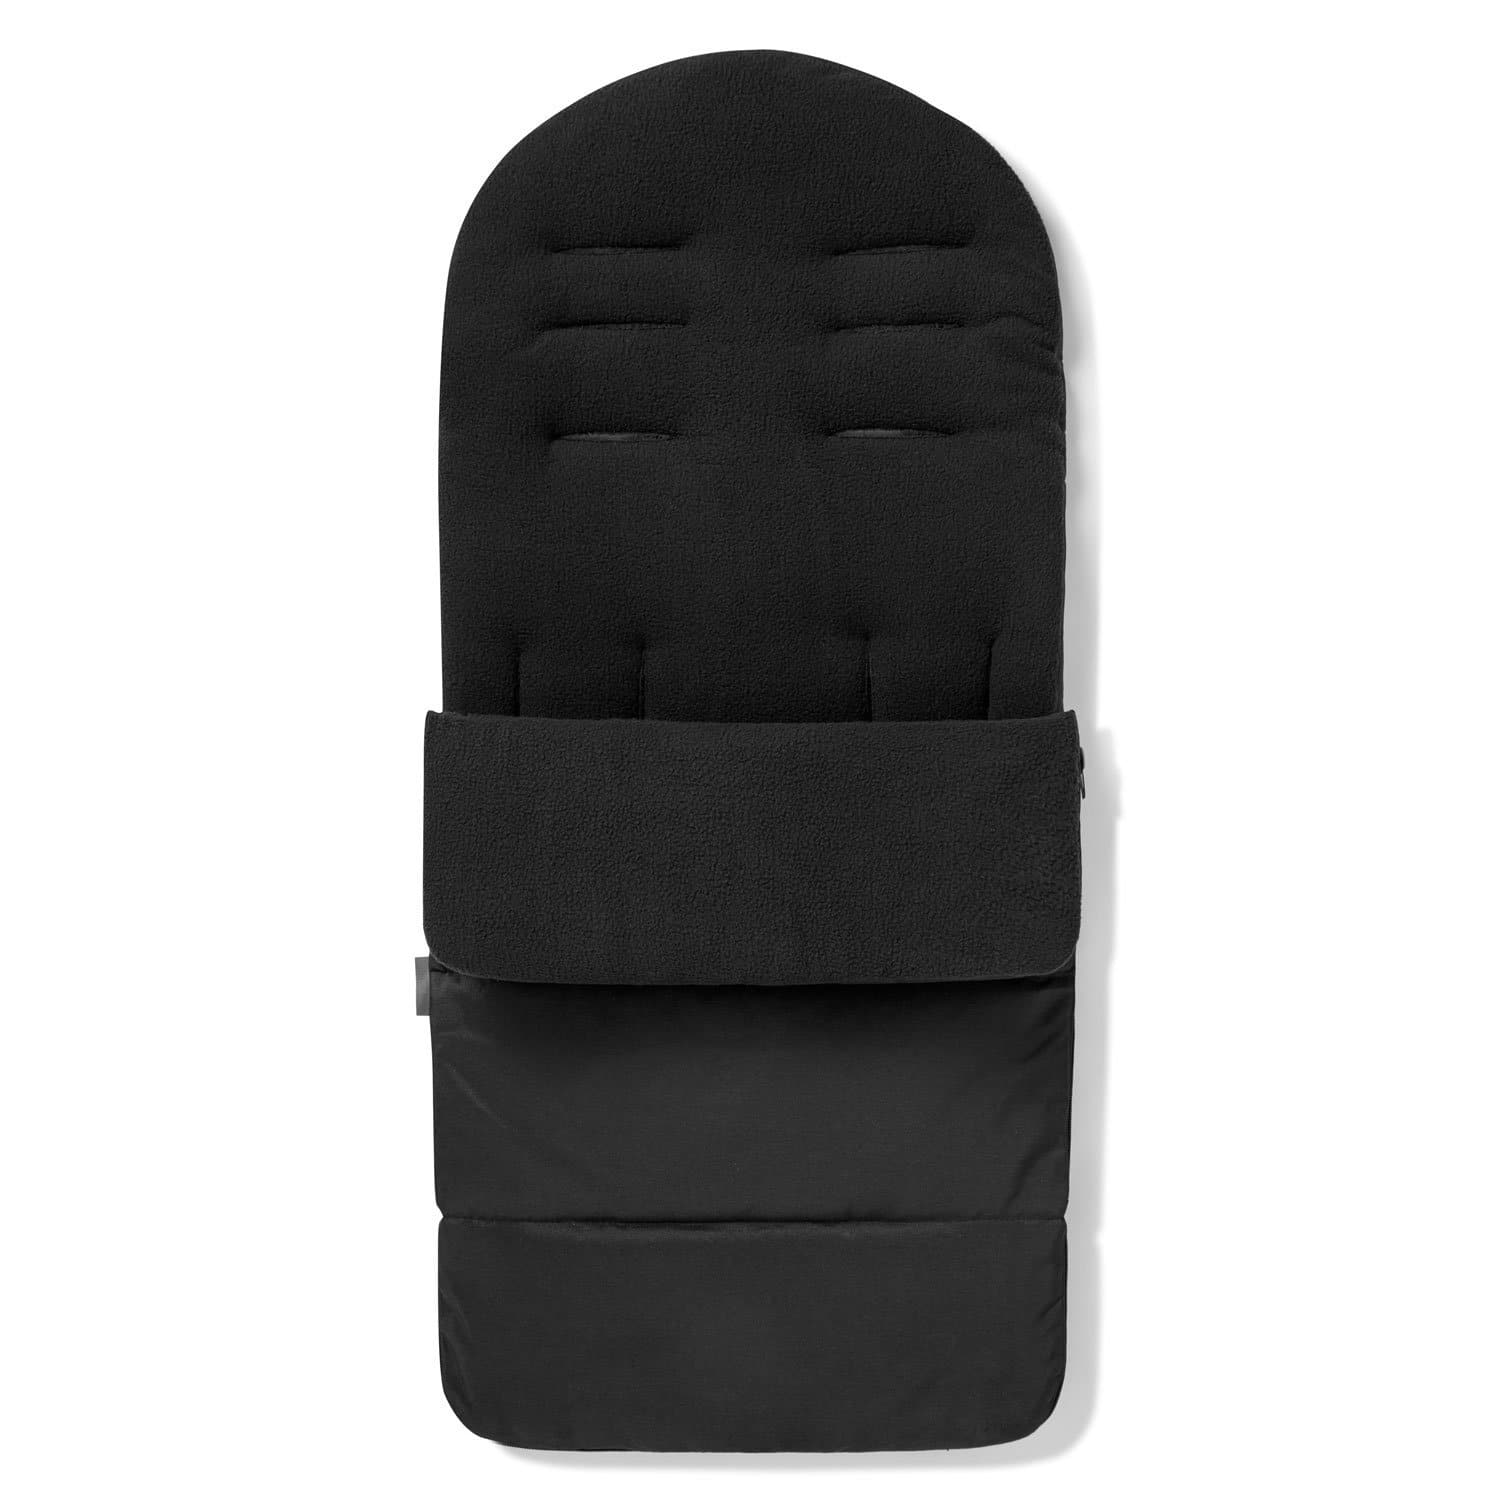 Premium Footmuff / Cosy Toes Compatible with Graco - Black Jack / Fits All Models | For Your Little One